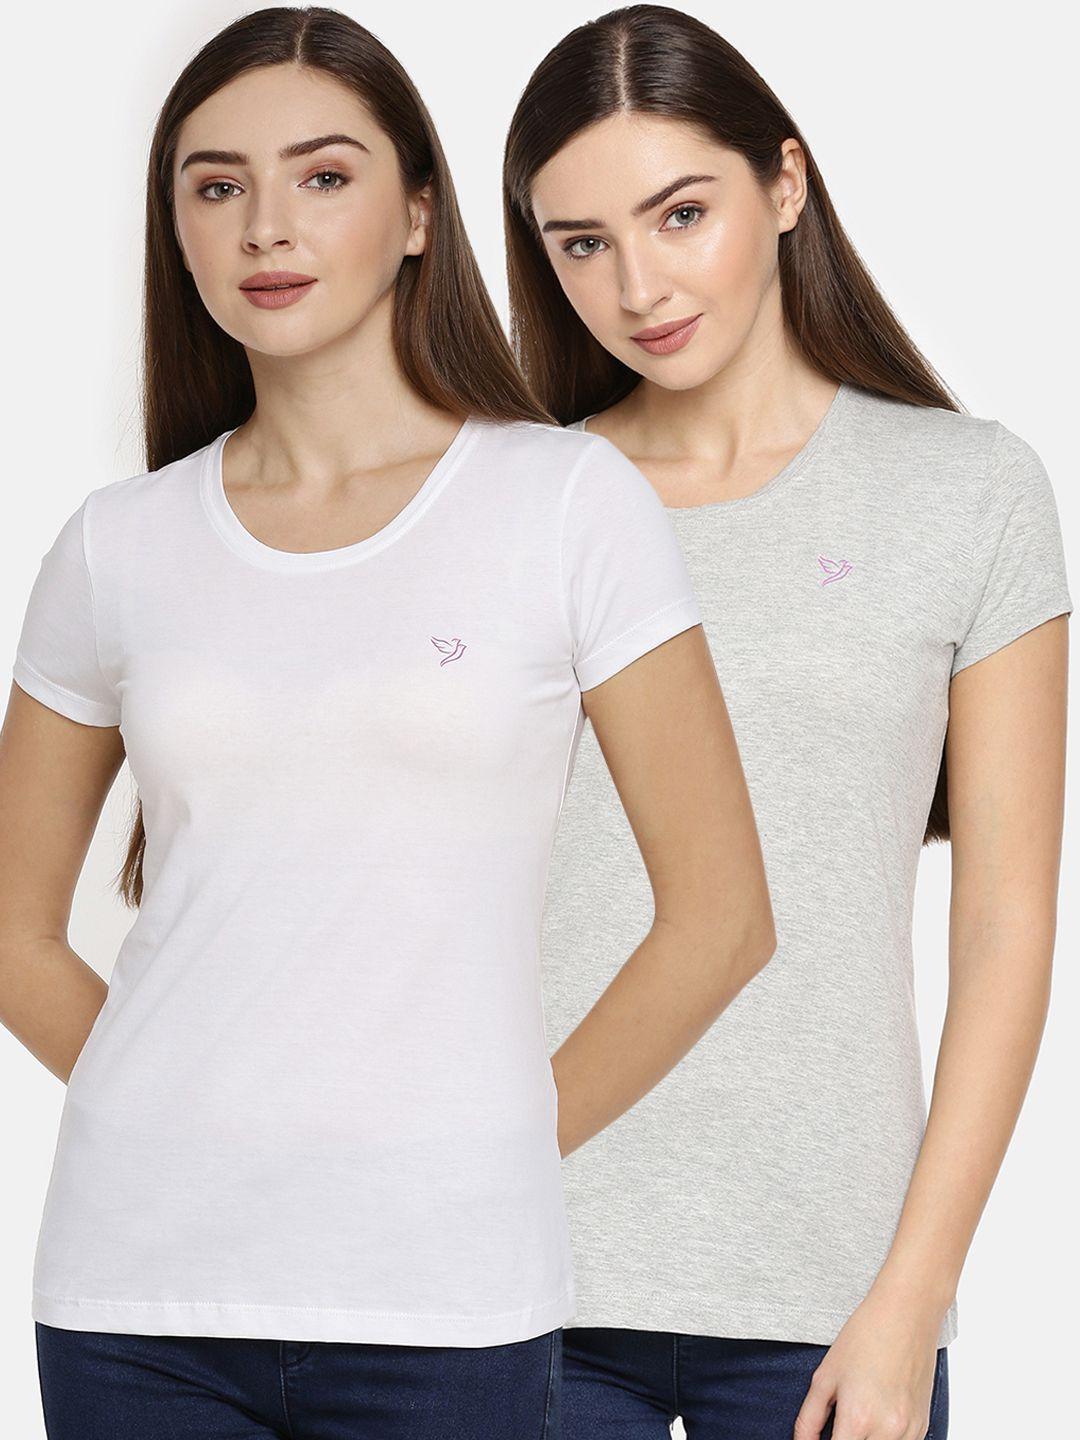 twin-birds-women-pack-of-2-slim-fit-solid-round-neck-t-shirts